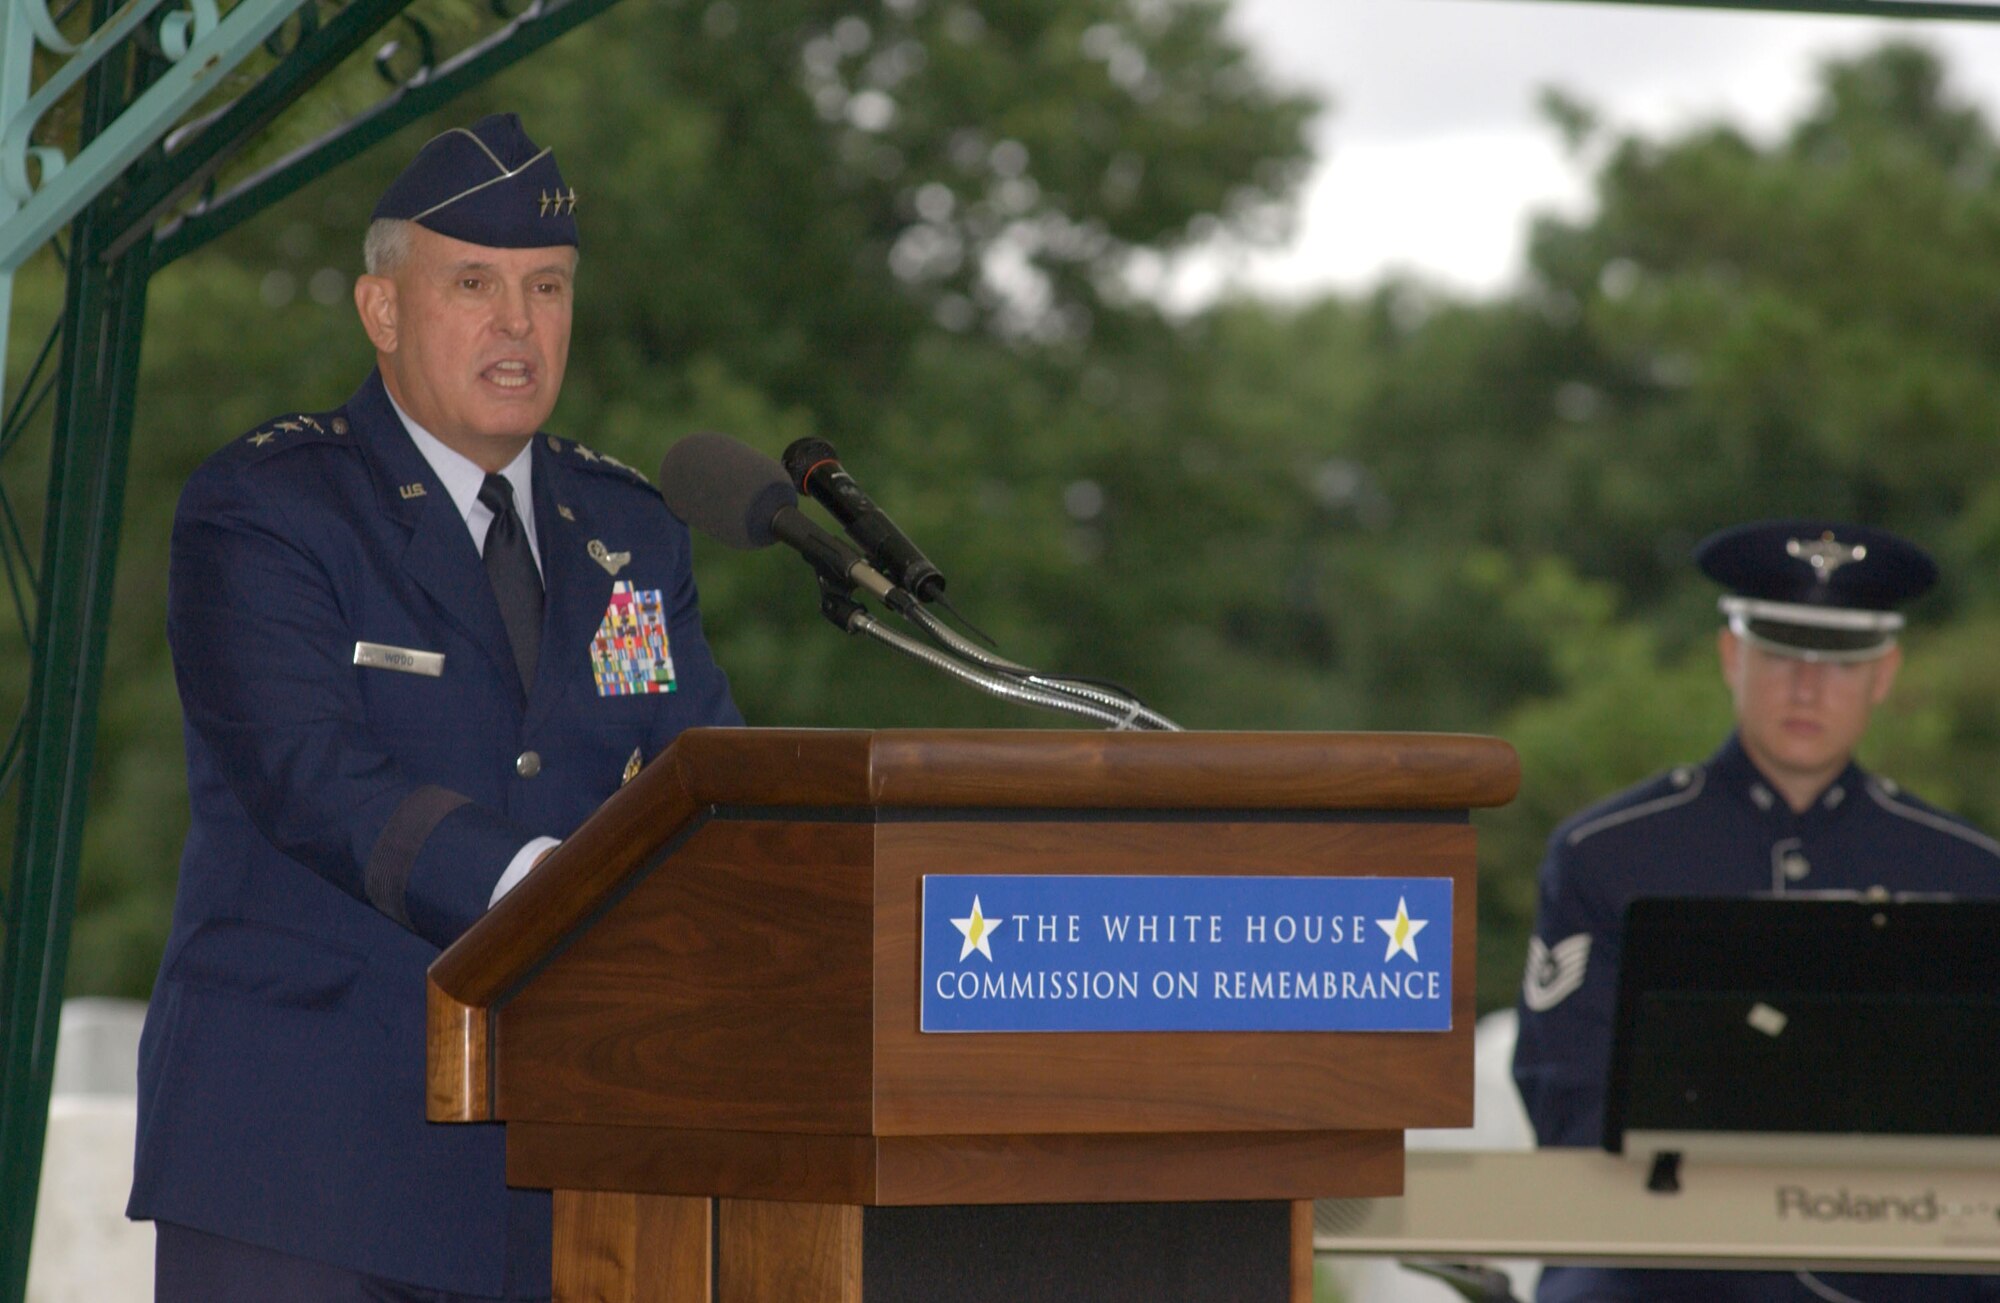 Lt. Gen. Stephen G. Wood speaks at the 10th anniversary remembrance of the Khobar Towers bombing on Sunday, June 25, at Arlington National Cemetery, Va. Nineteen Airmen were killed in the terrorist bombing at Dhahran Air Base, Saudi Arabia. General Wood is deputy chief of staff for strategic plans and programs at headquarters Air Force.  (U.S. Air Force photo/Tech. Sgt. Cohen A. Young)